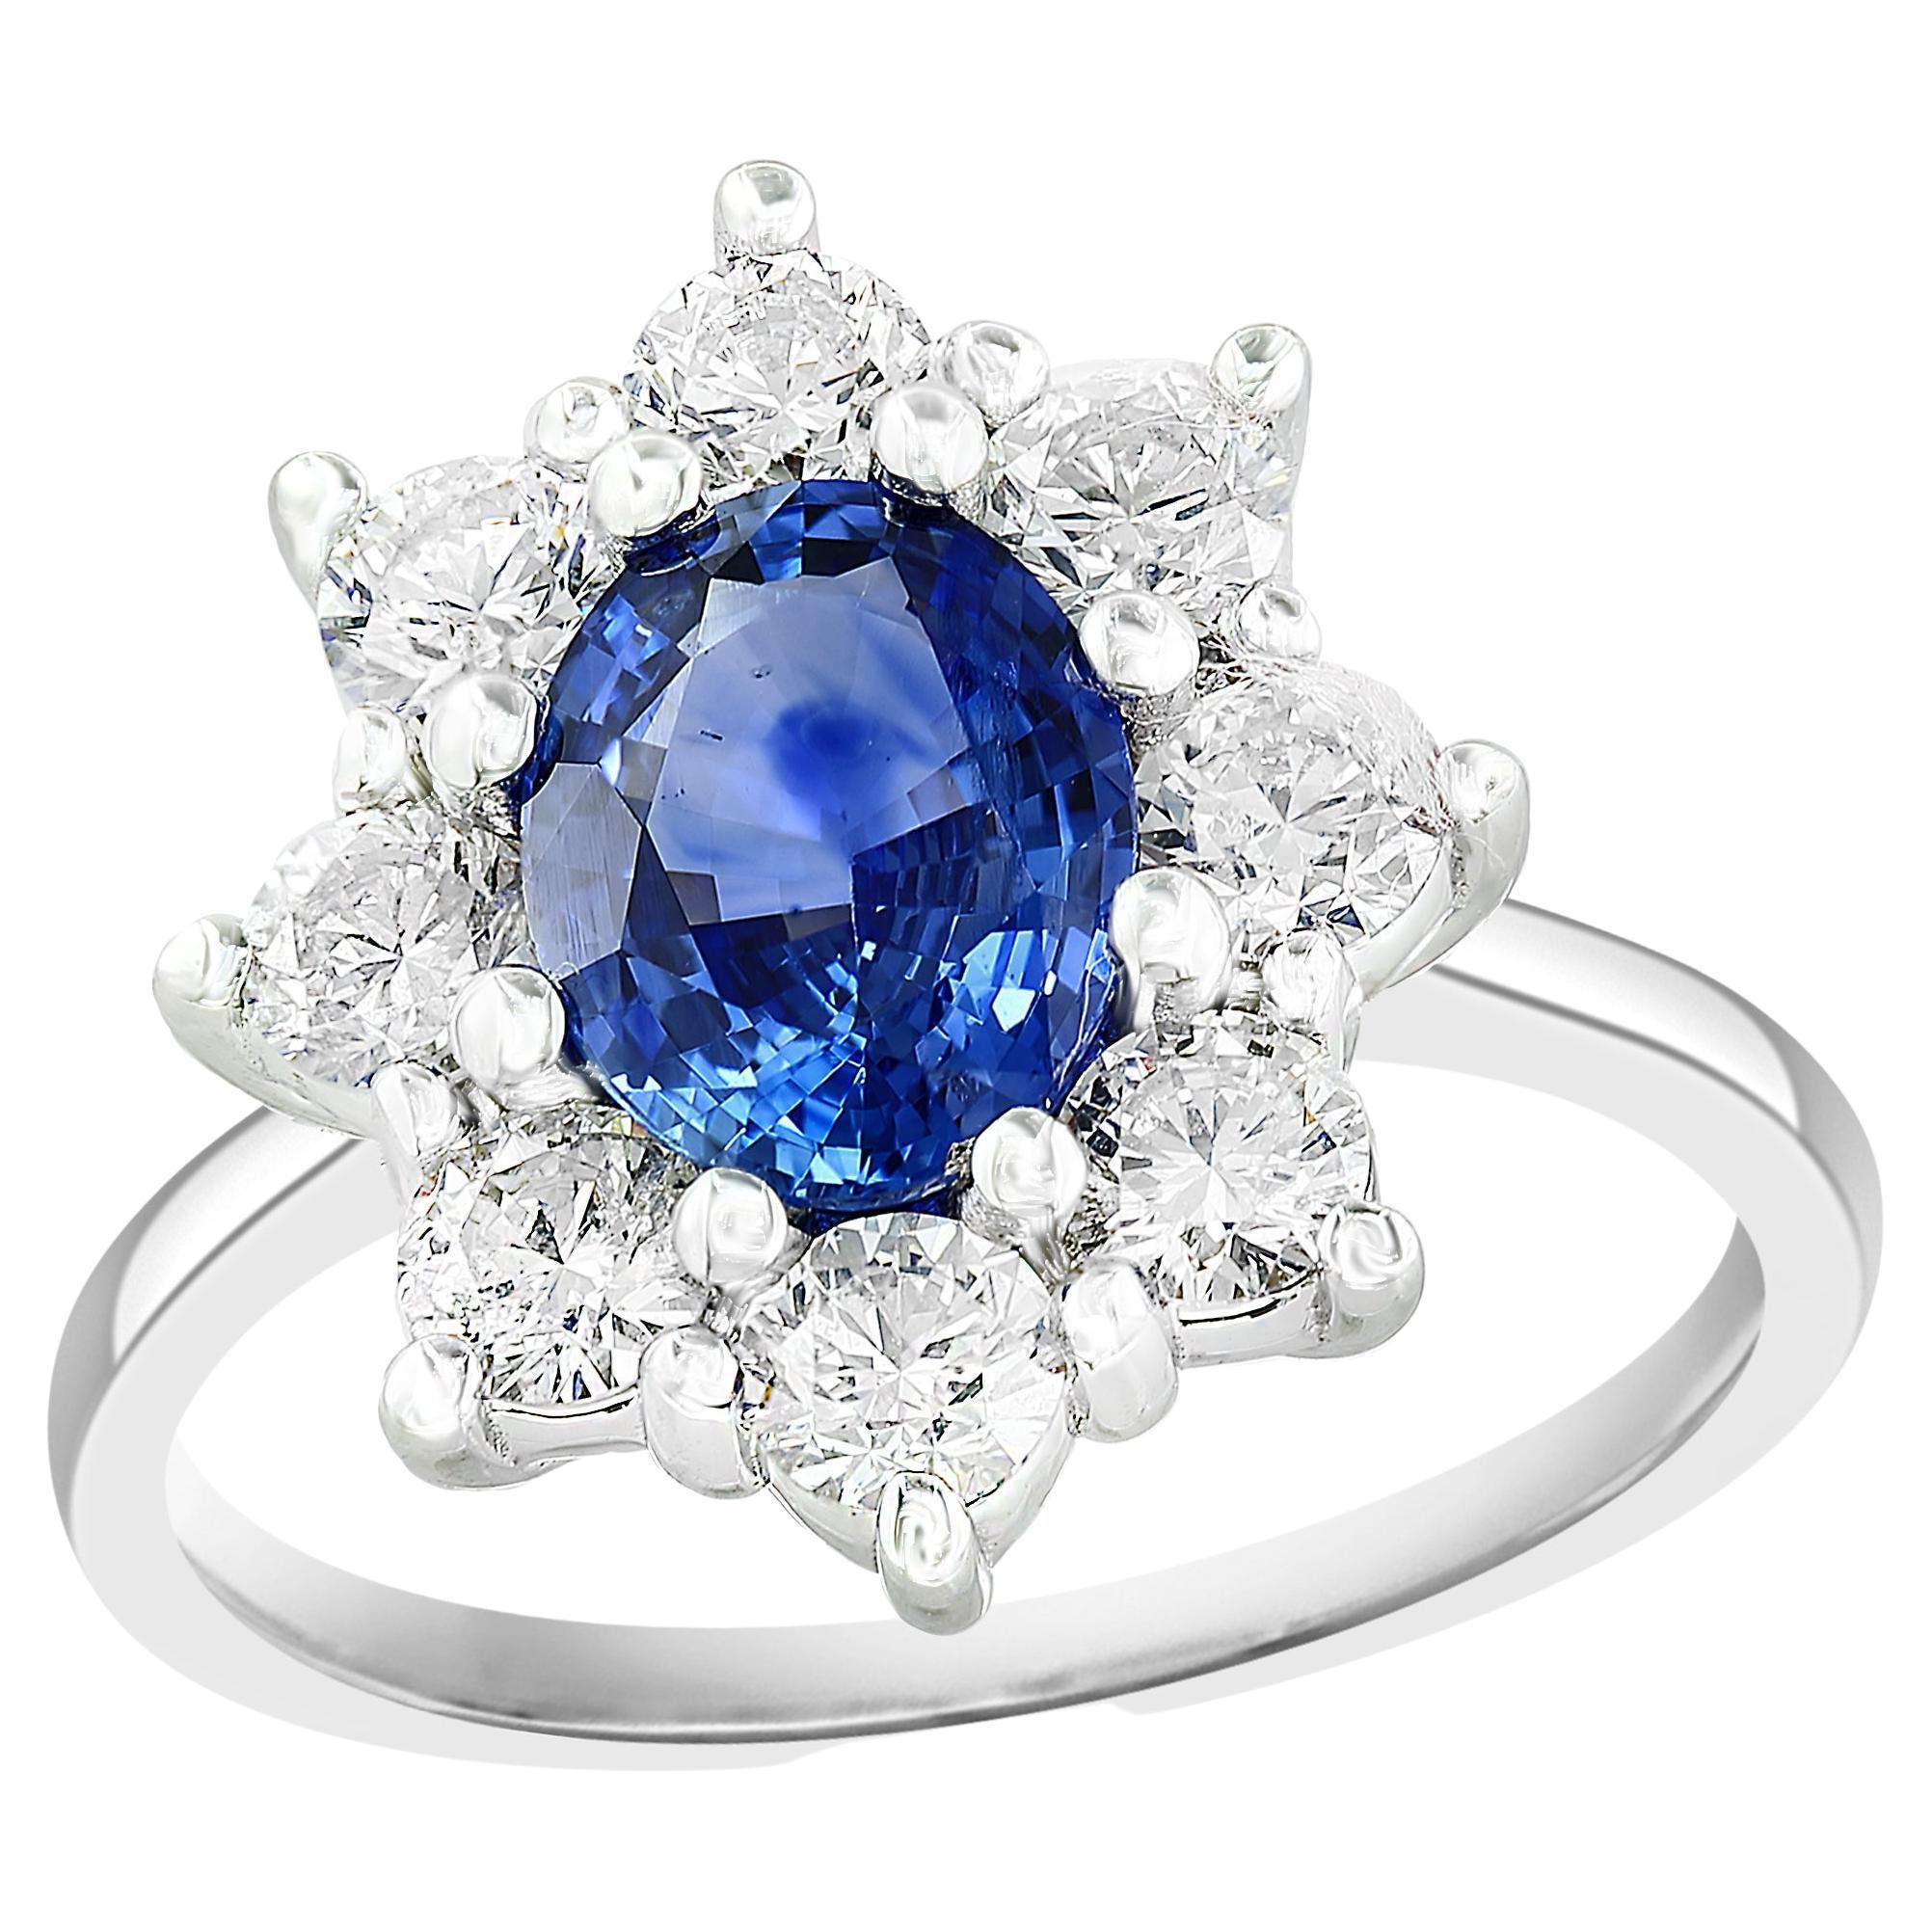 1.55 Carat Oval Cut Blue Sapphire and Diamond Ring in 14k White Gold